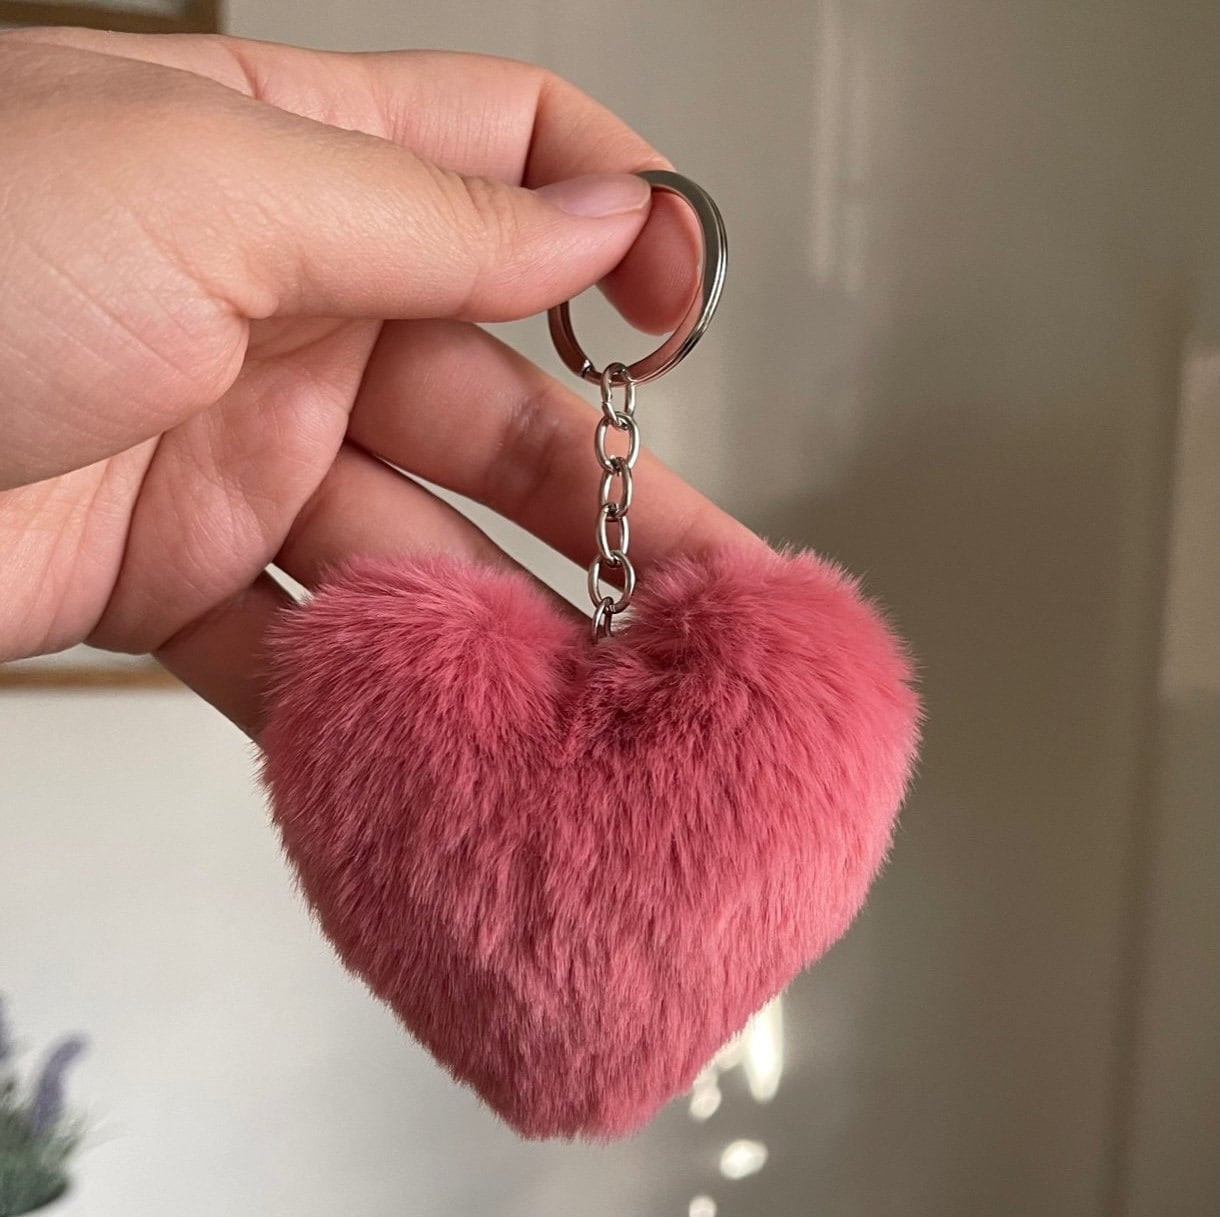 Hicarer 12 Pieces Pom Poms Keychains Fluffy Heart Shape Pompoms Keyrings Puff Ball Faux Fur Keychain for Valentine's Day